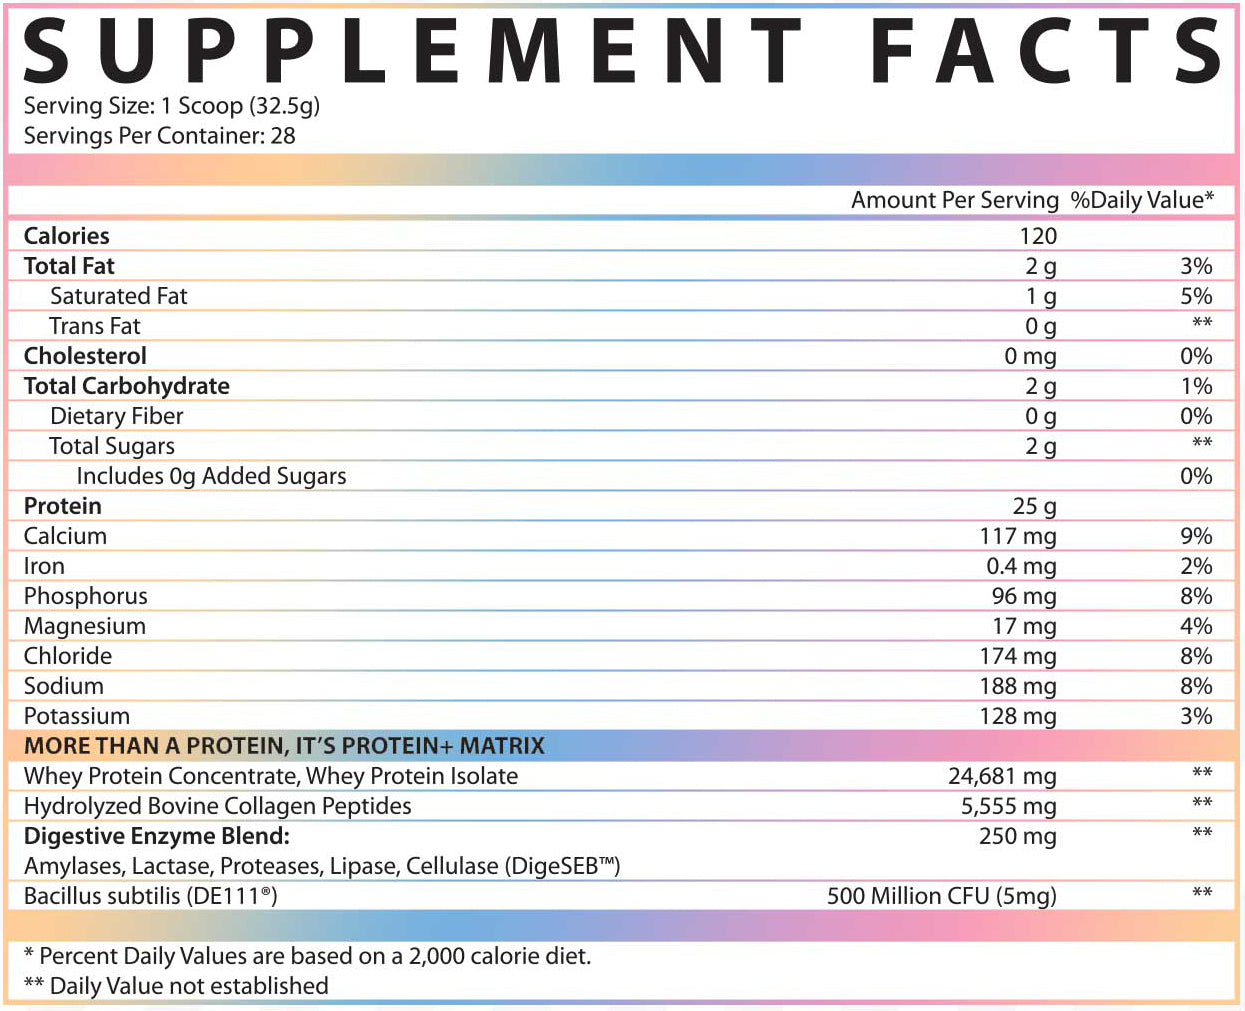 Inspired Nutraceuticals Protein+